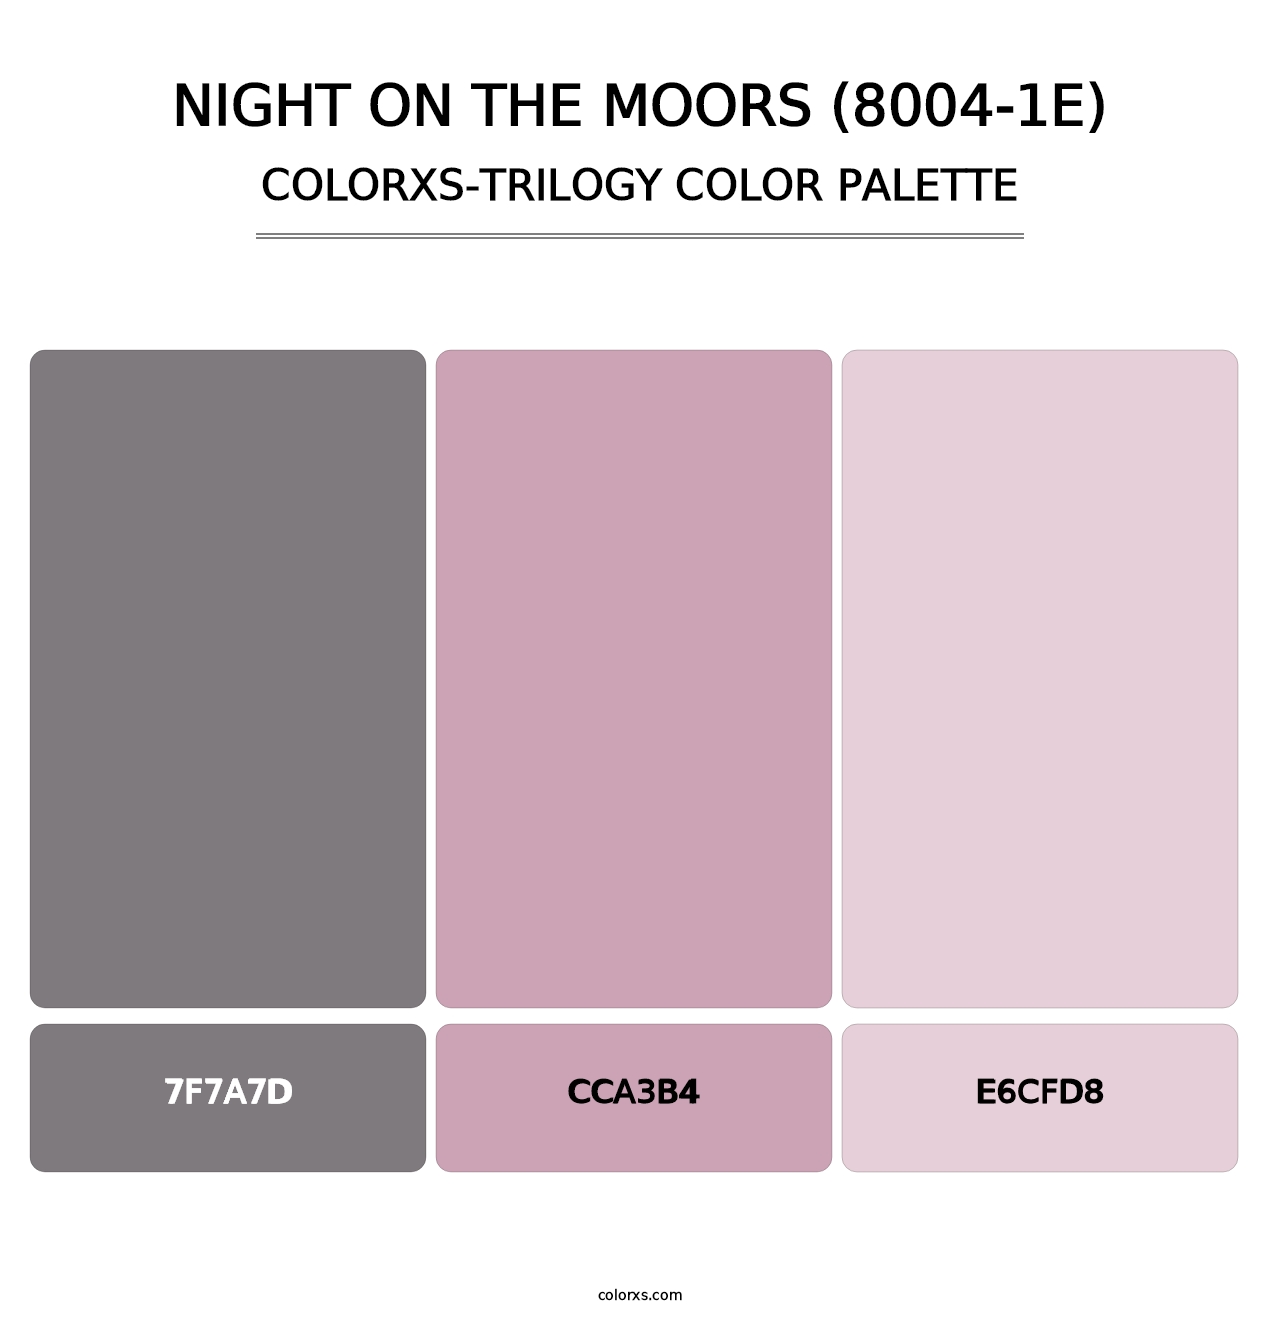 Night on the Moors (8004-1E) - Colorxs Trilogy Palette